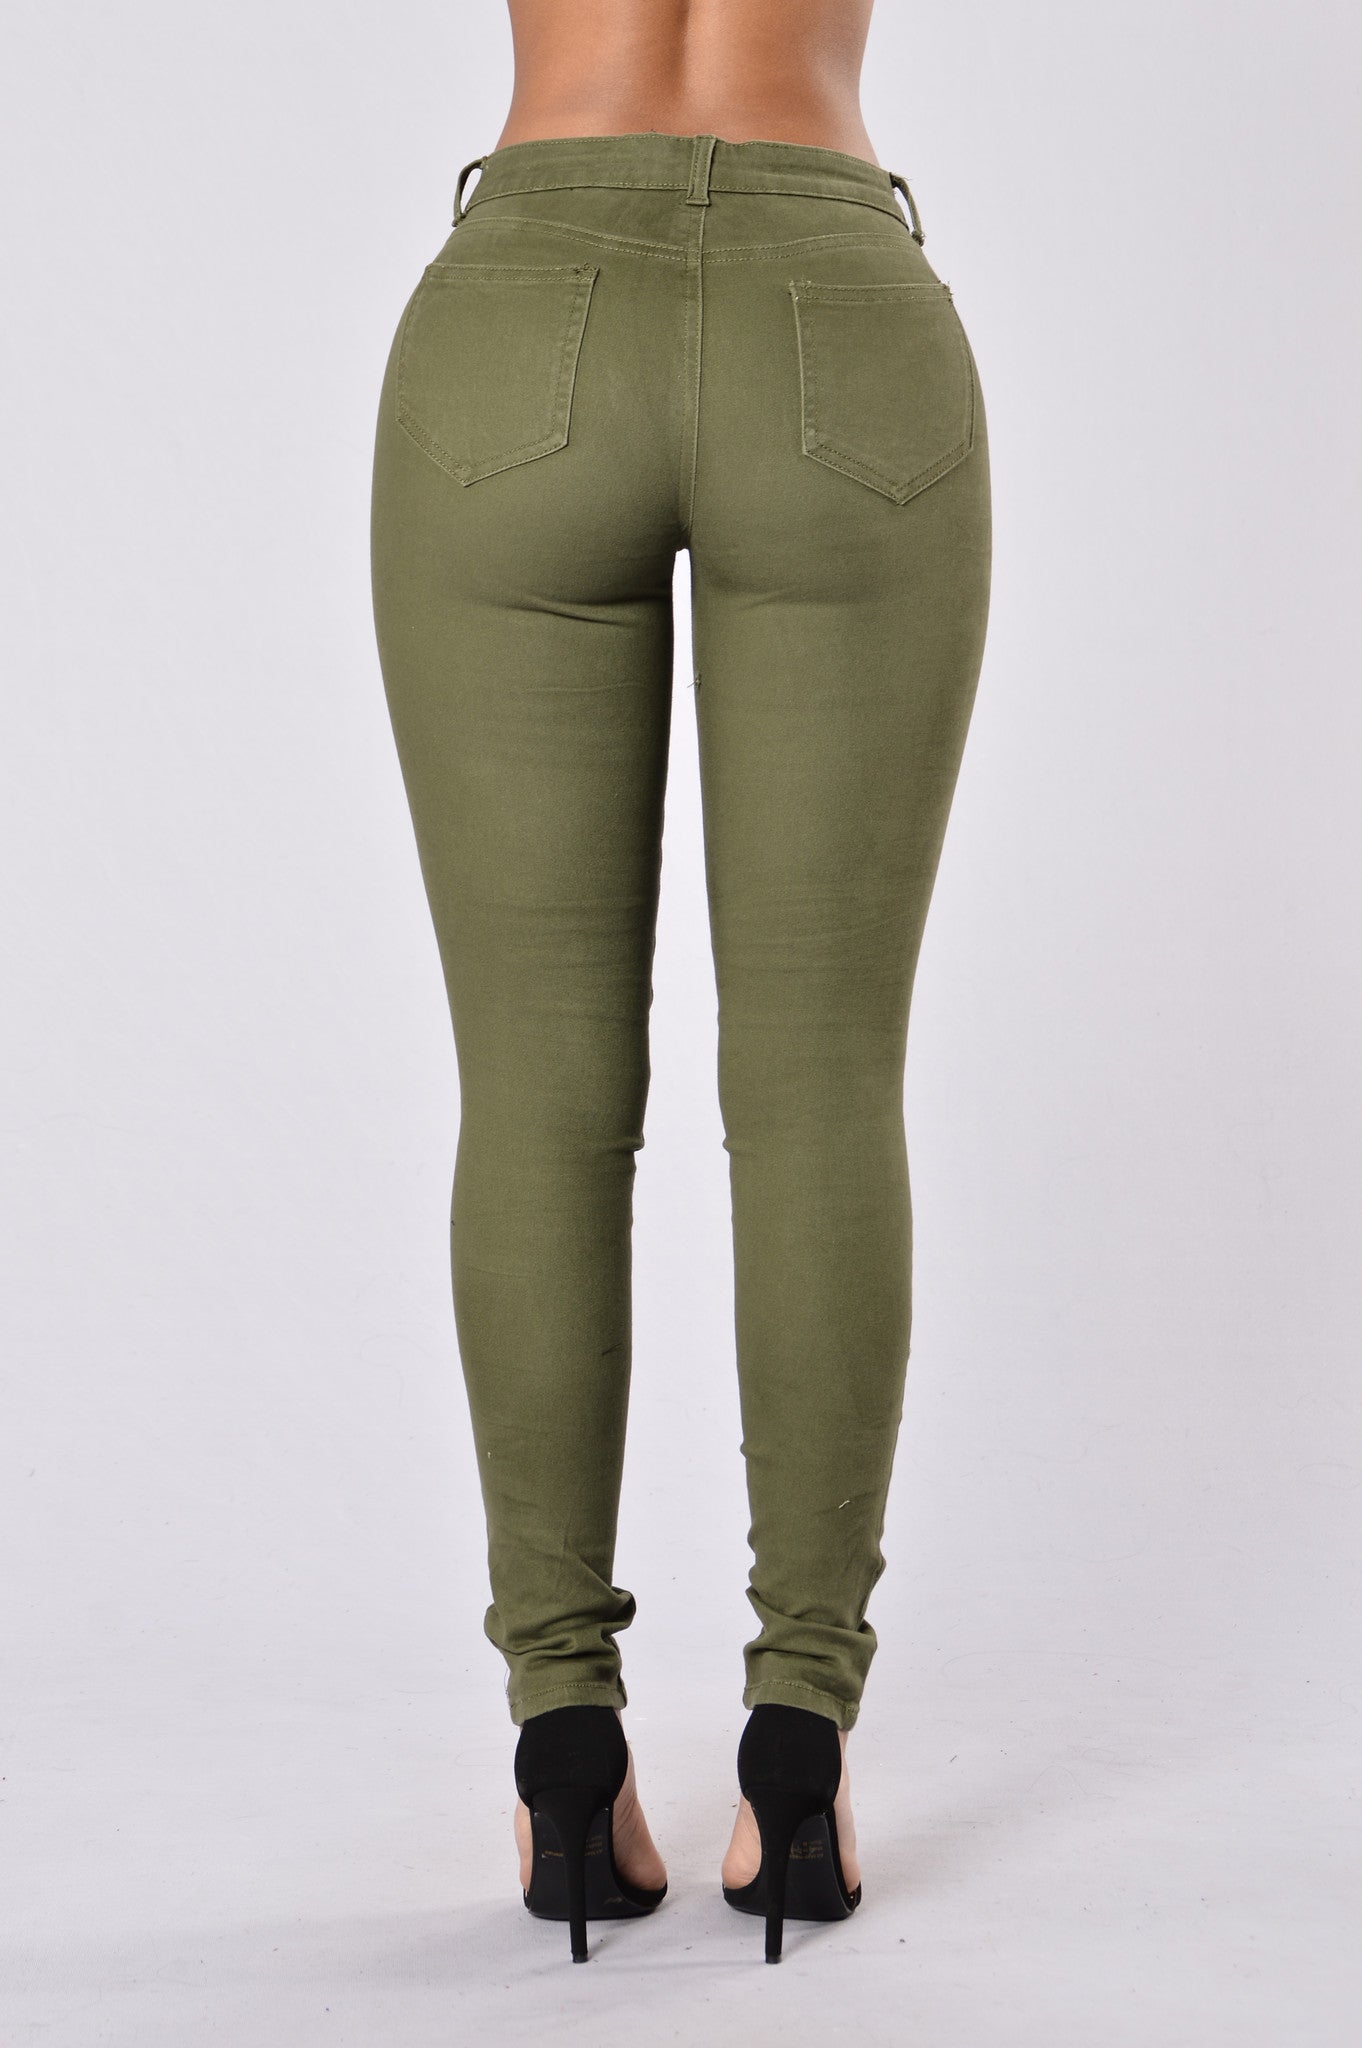 Zip It Up Jeans - Utility Green